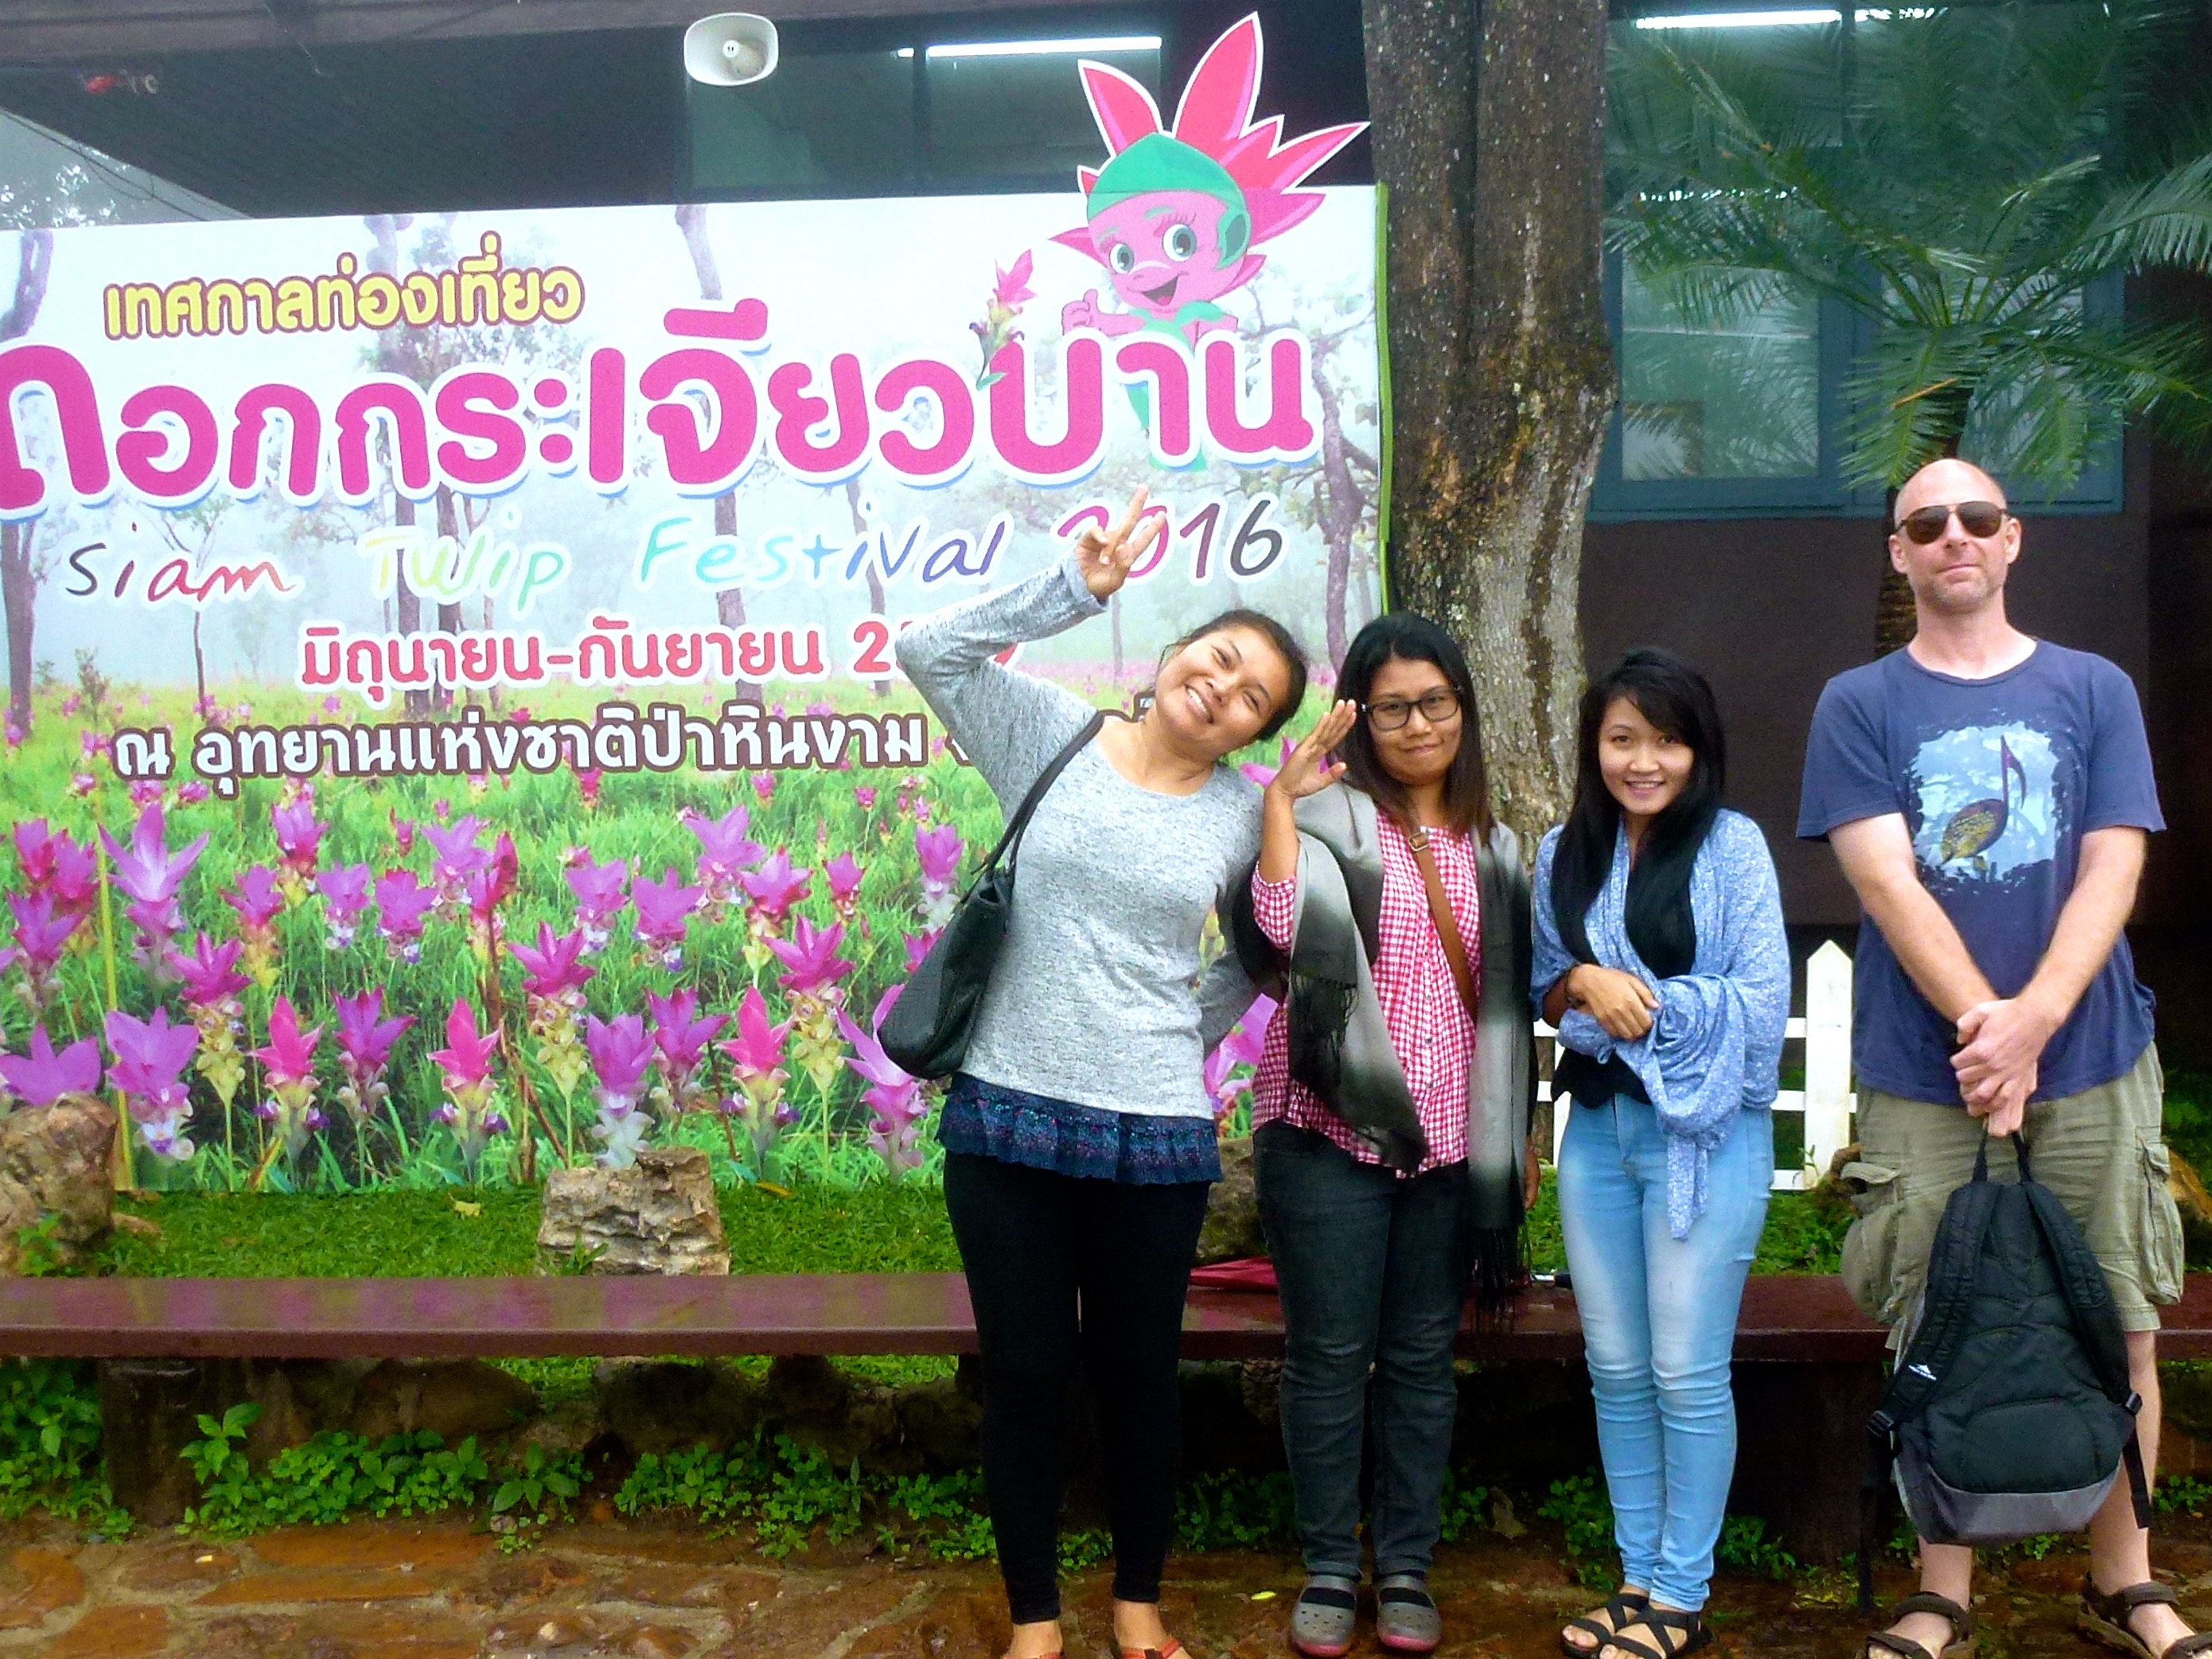 The Breakthrough leaders took us to see the wild Dok Krayjiaw flowers in Chaiyaphum Province